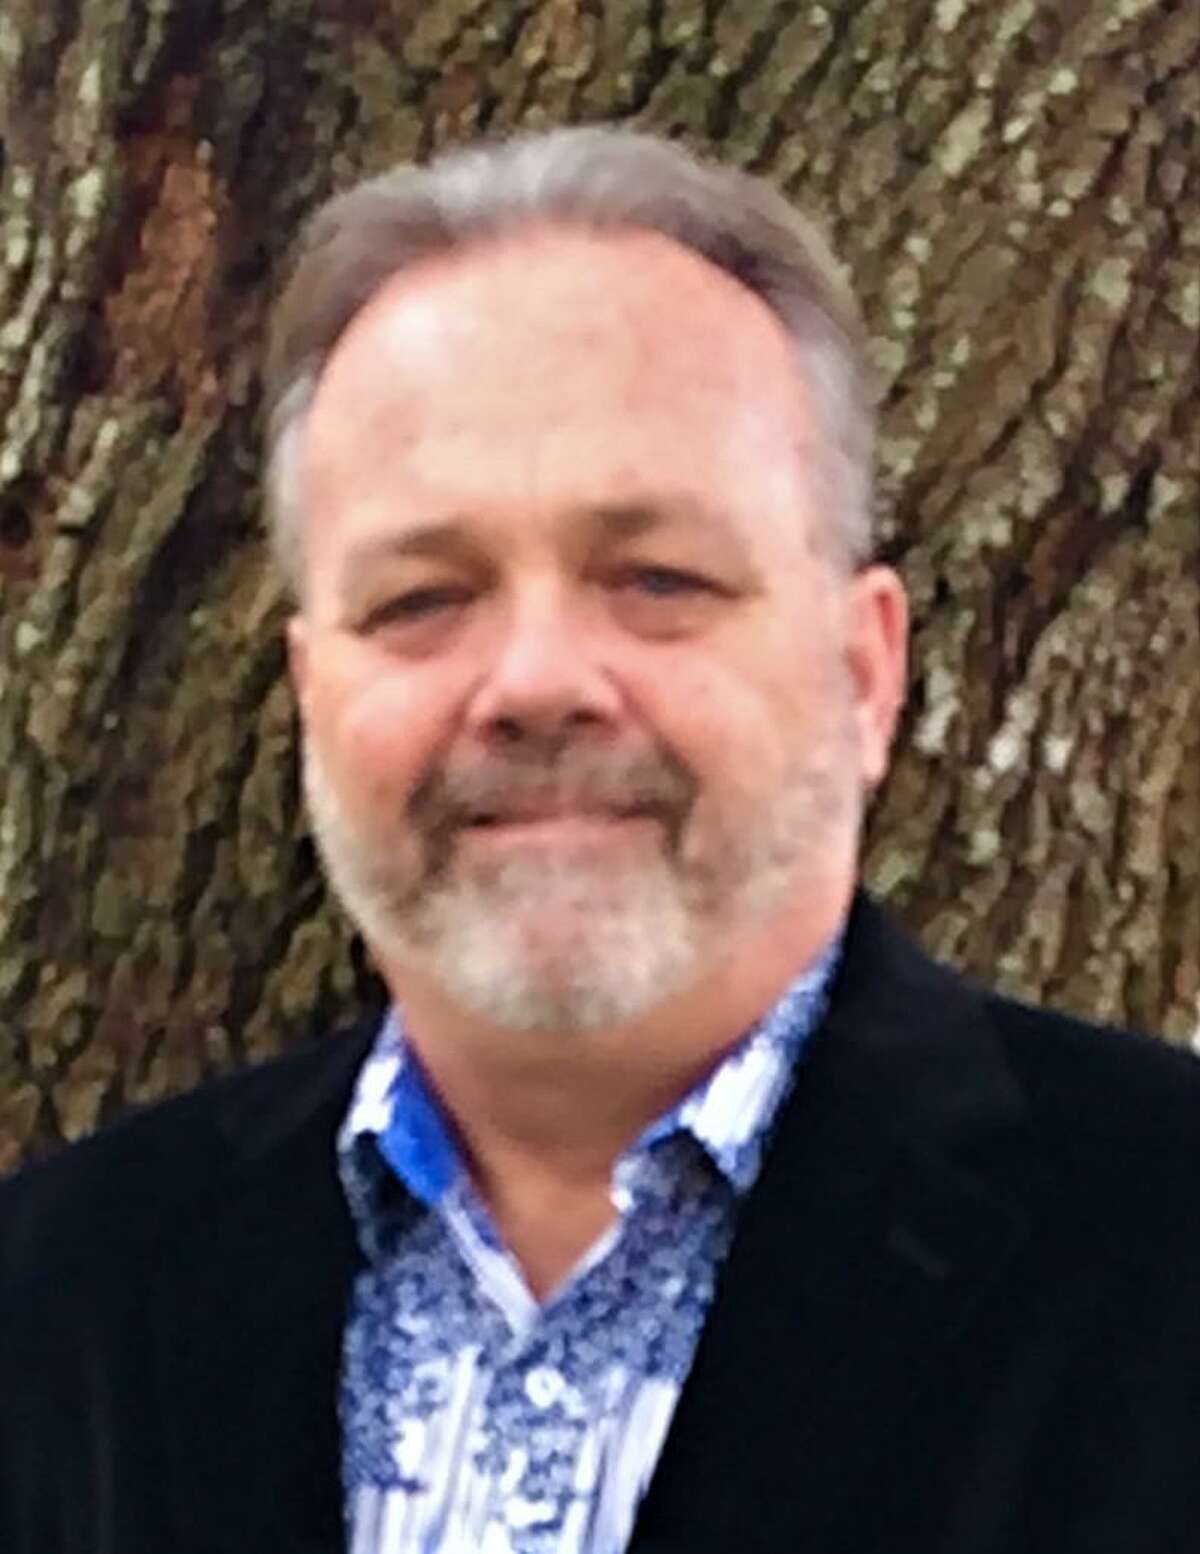 Shenandoah council incumbent Ted Fletcher announced Wednesday that he is seeking another term on the council in his Position 2 seat. On Jan. 13, 2021, the Shenandoah City Council voted unanimously to approve holding the municipal elections in May for three open city council seats; Seats 2, 3 and 4 are up for election this year. The seats are held by Fletcher, Dean Gristy and Charlie Bradt.